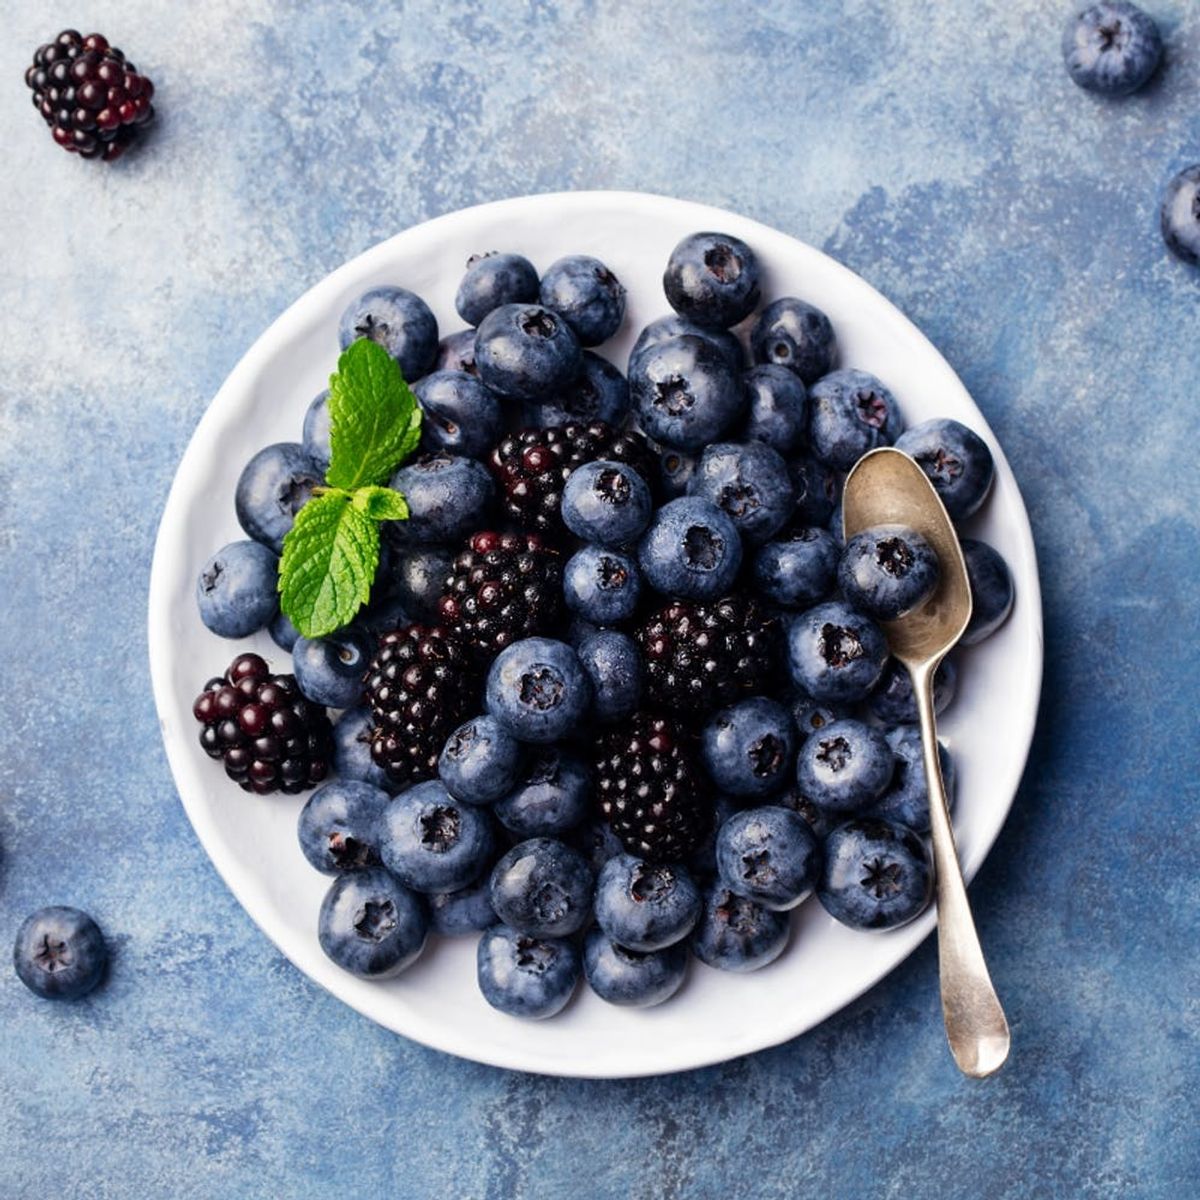 7 Ultra Violet Foods to Give Your Plate an Ultra-Healthy Pop